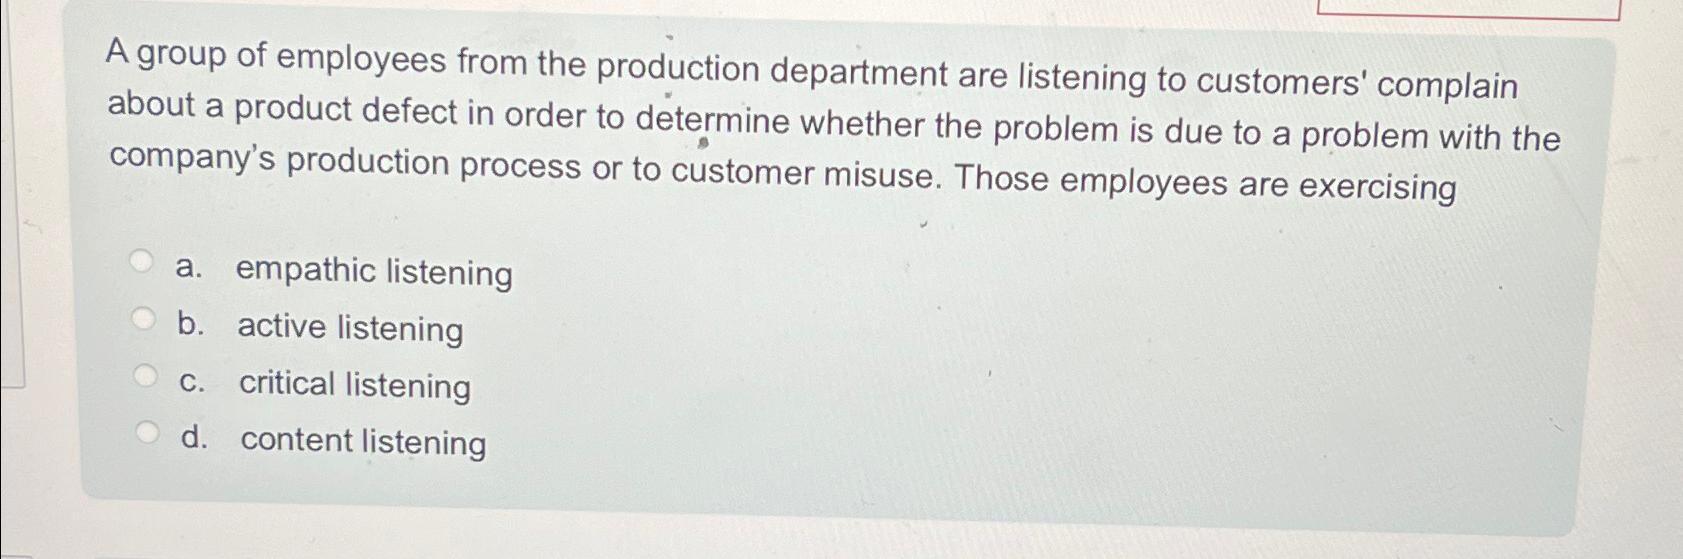 A group of employees from the production department are listening to customers' complain about a product